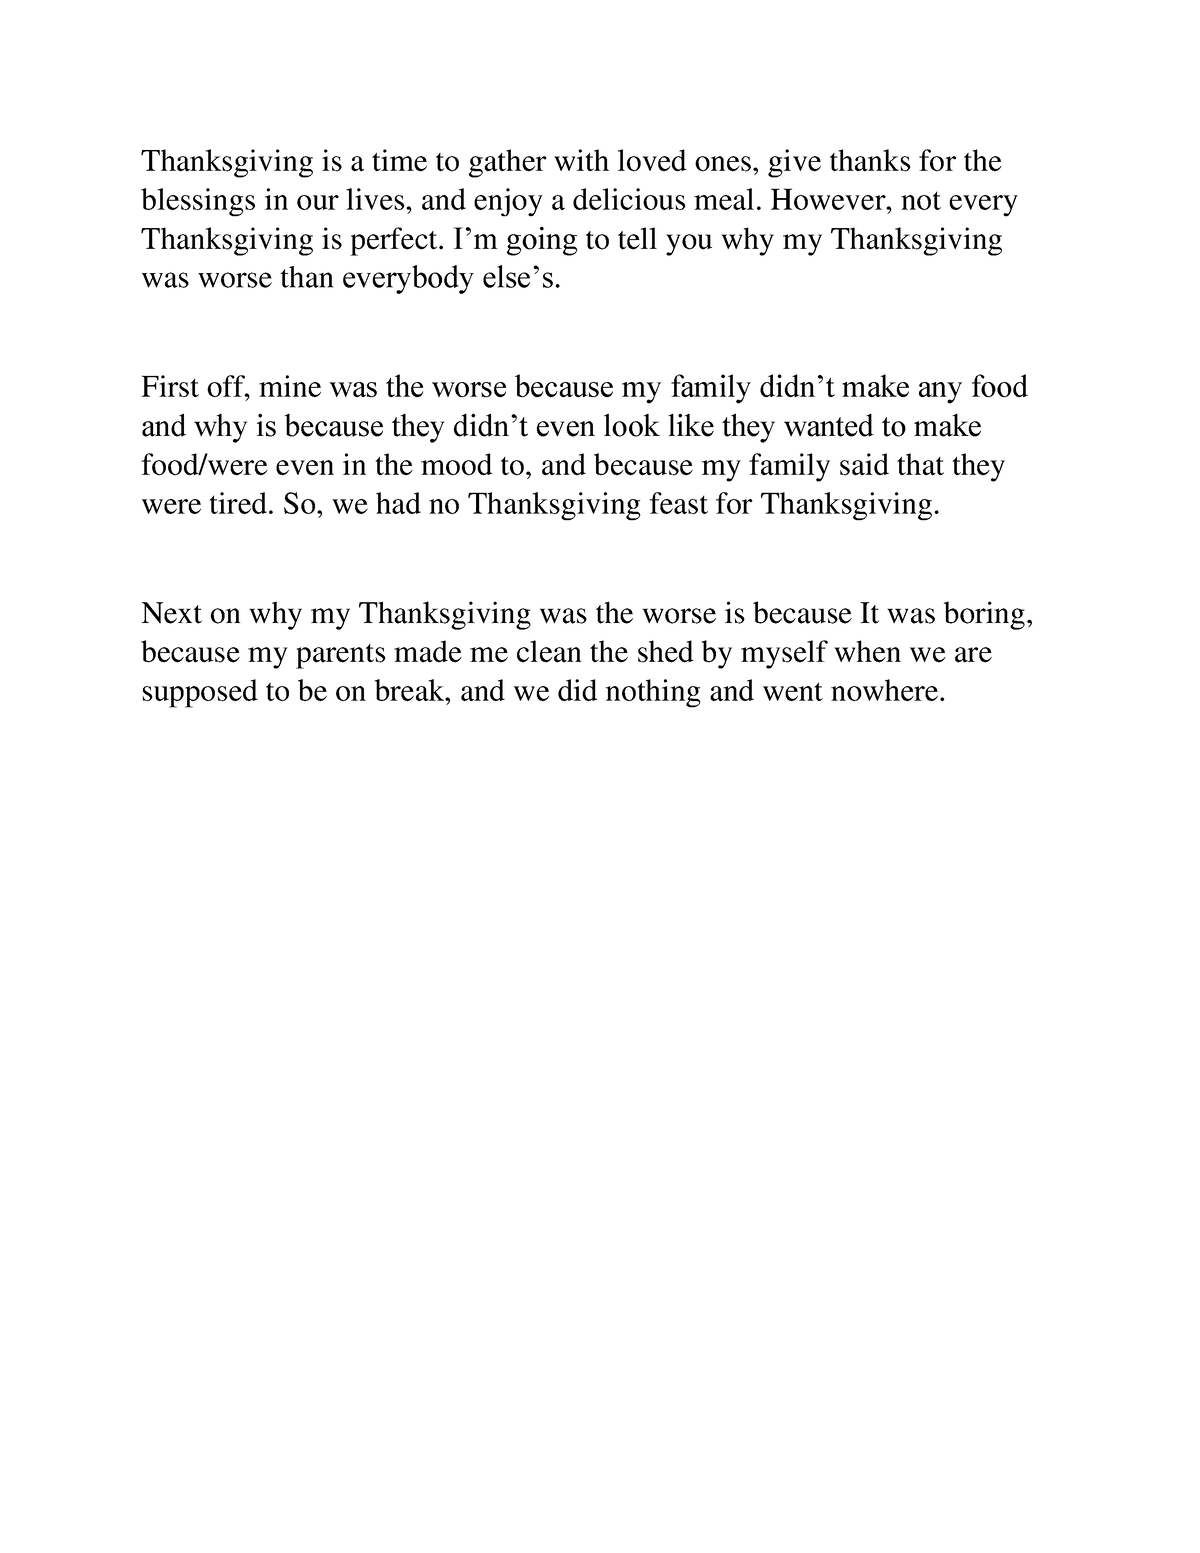 essay about the first thanksgiving